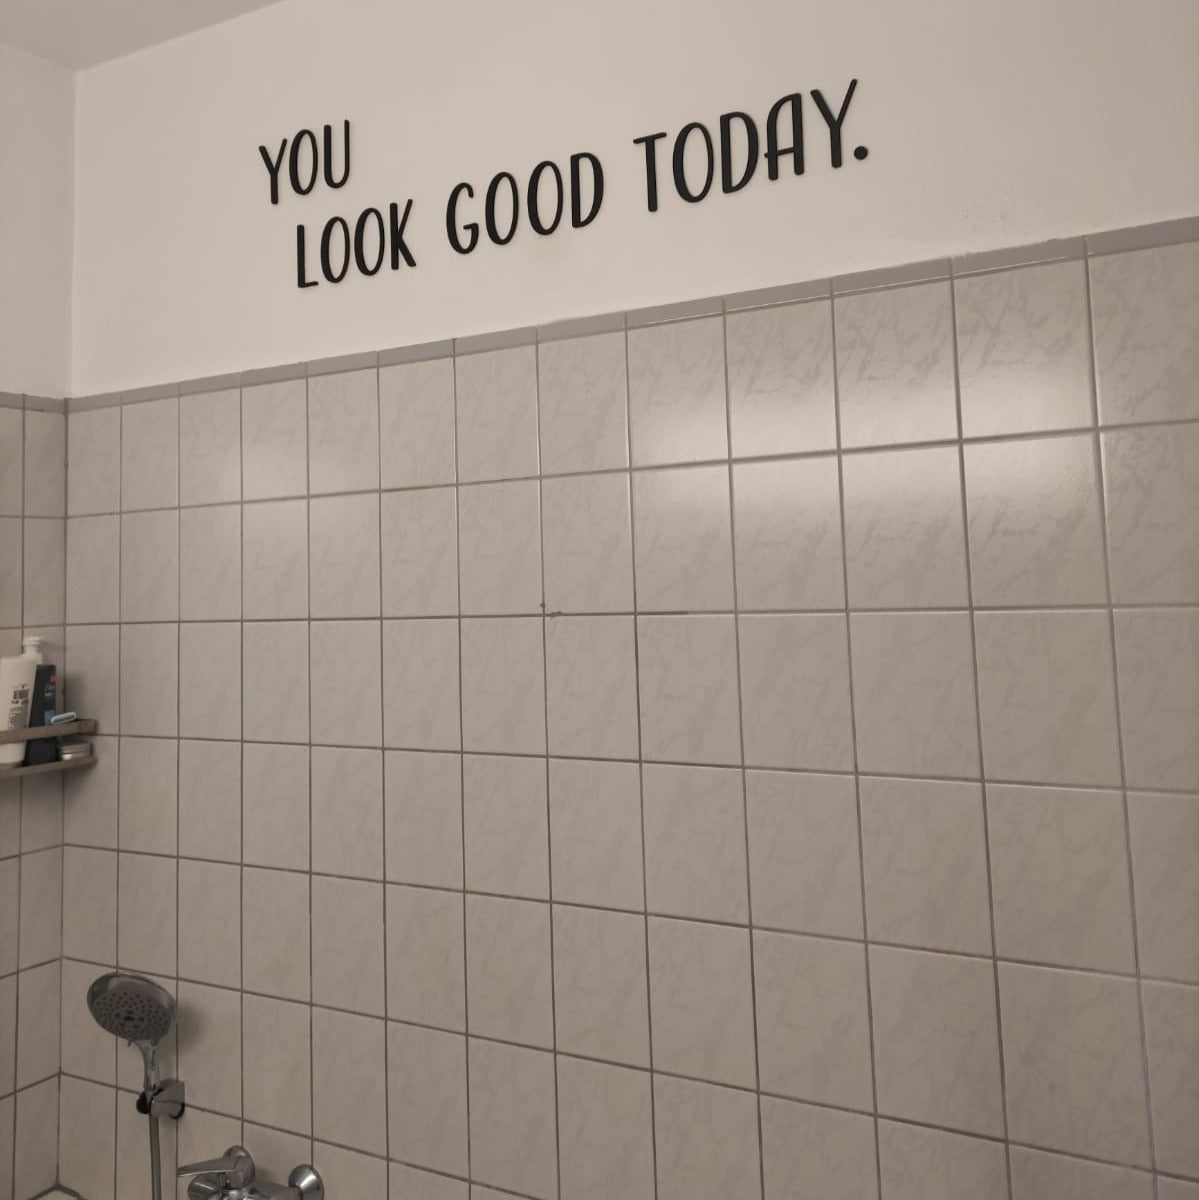 You look good today